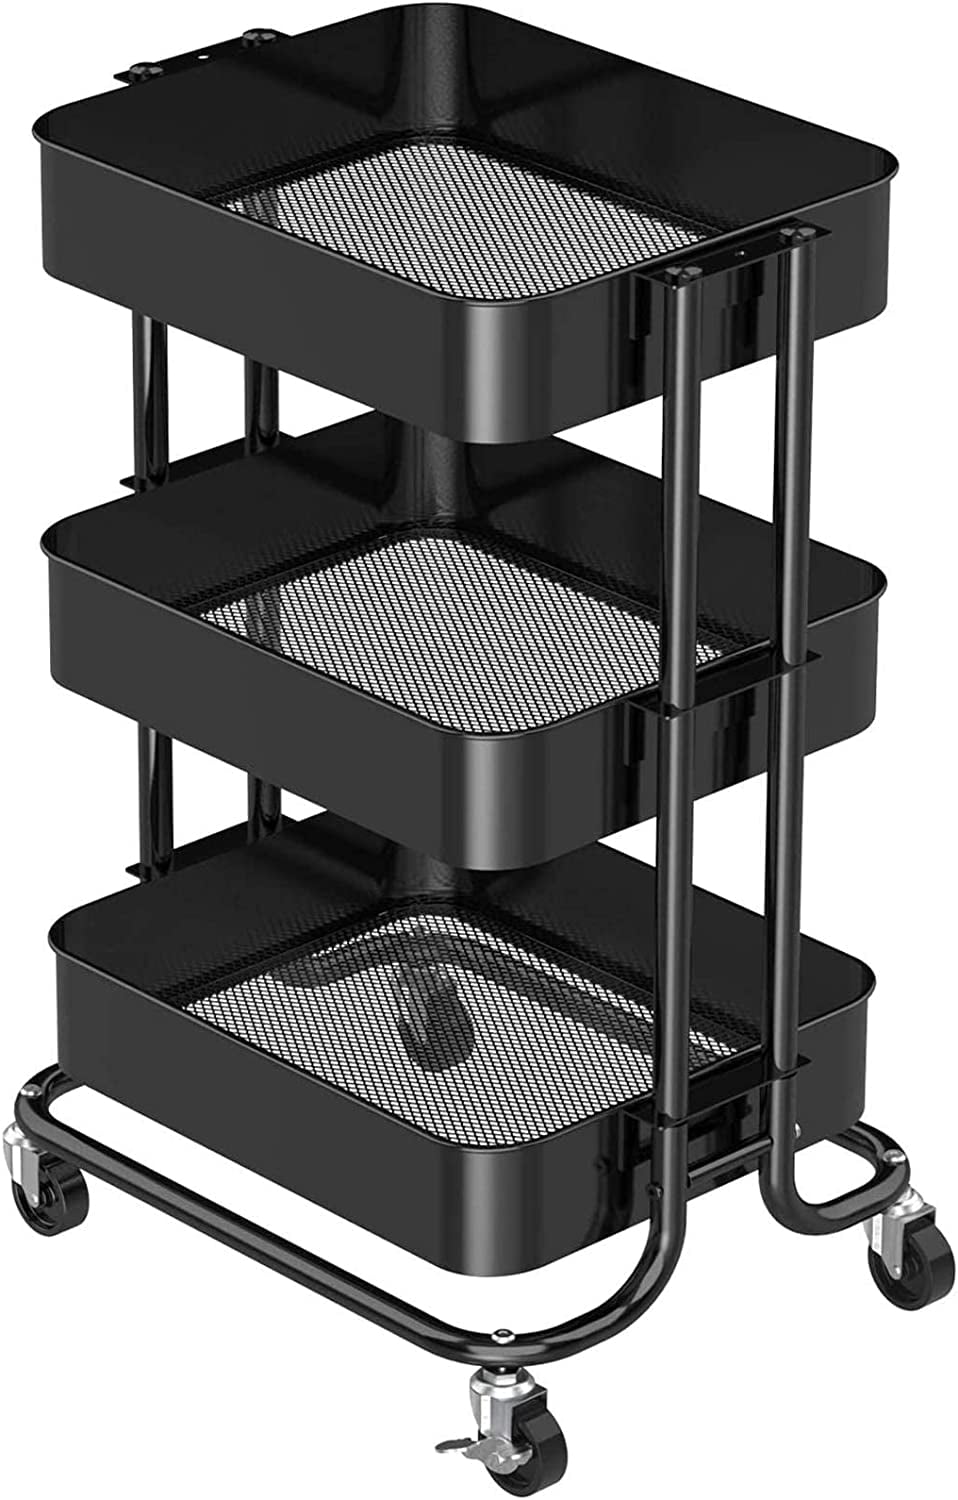 Myfurnideal 3-Tier Rolling Utility Cart Metal Storage Cart with Handle for Kitchen， Dining Room， Living Room， Hold up to 66lbs